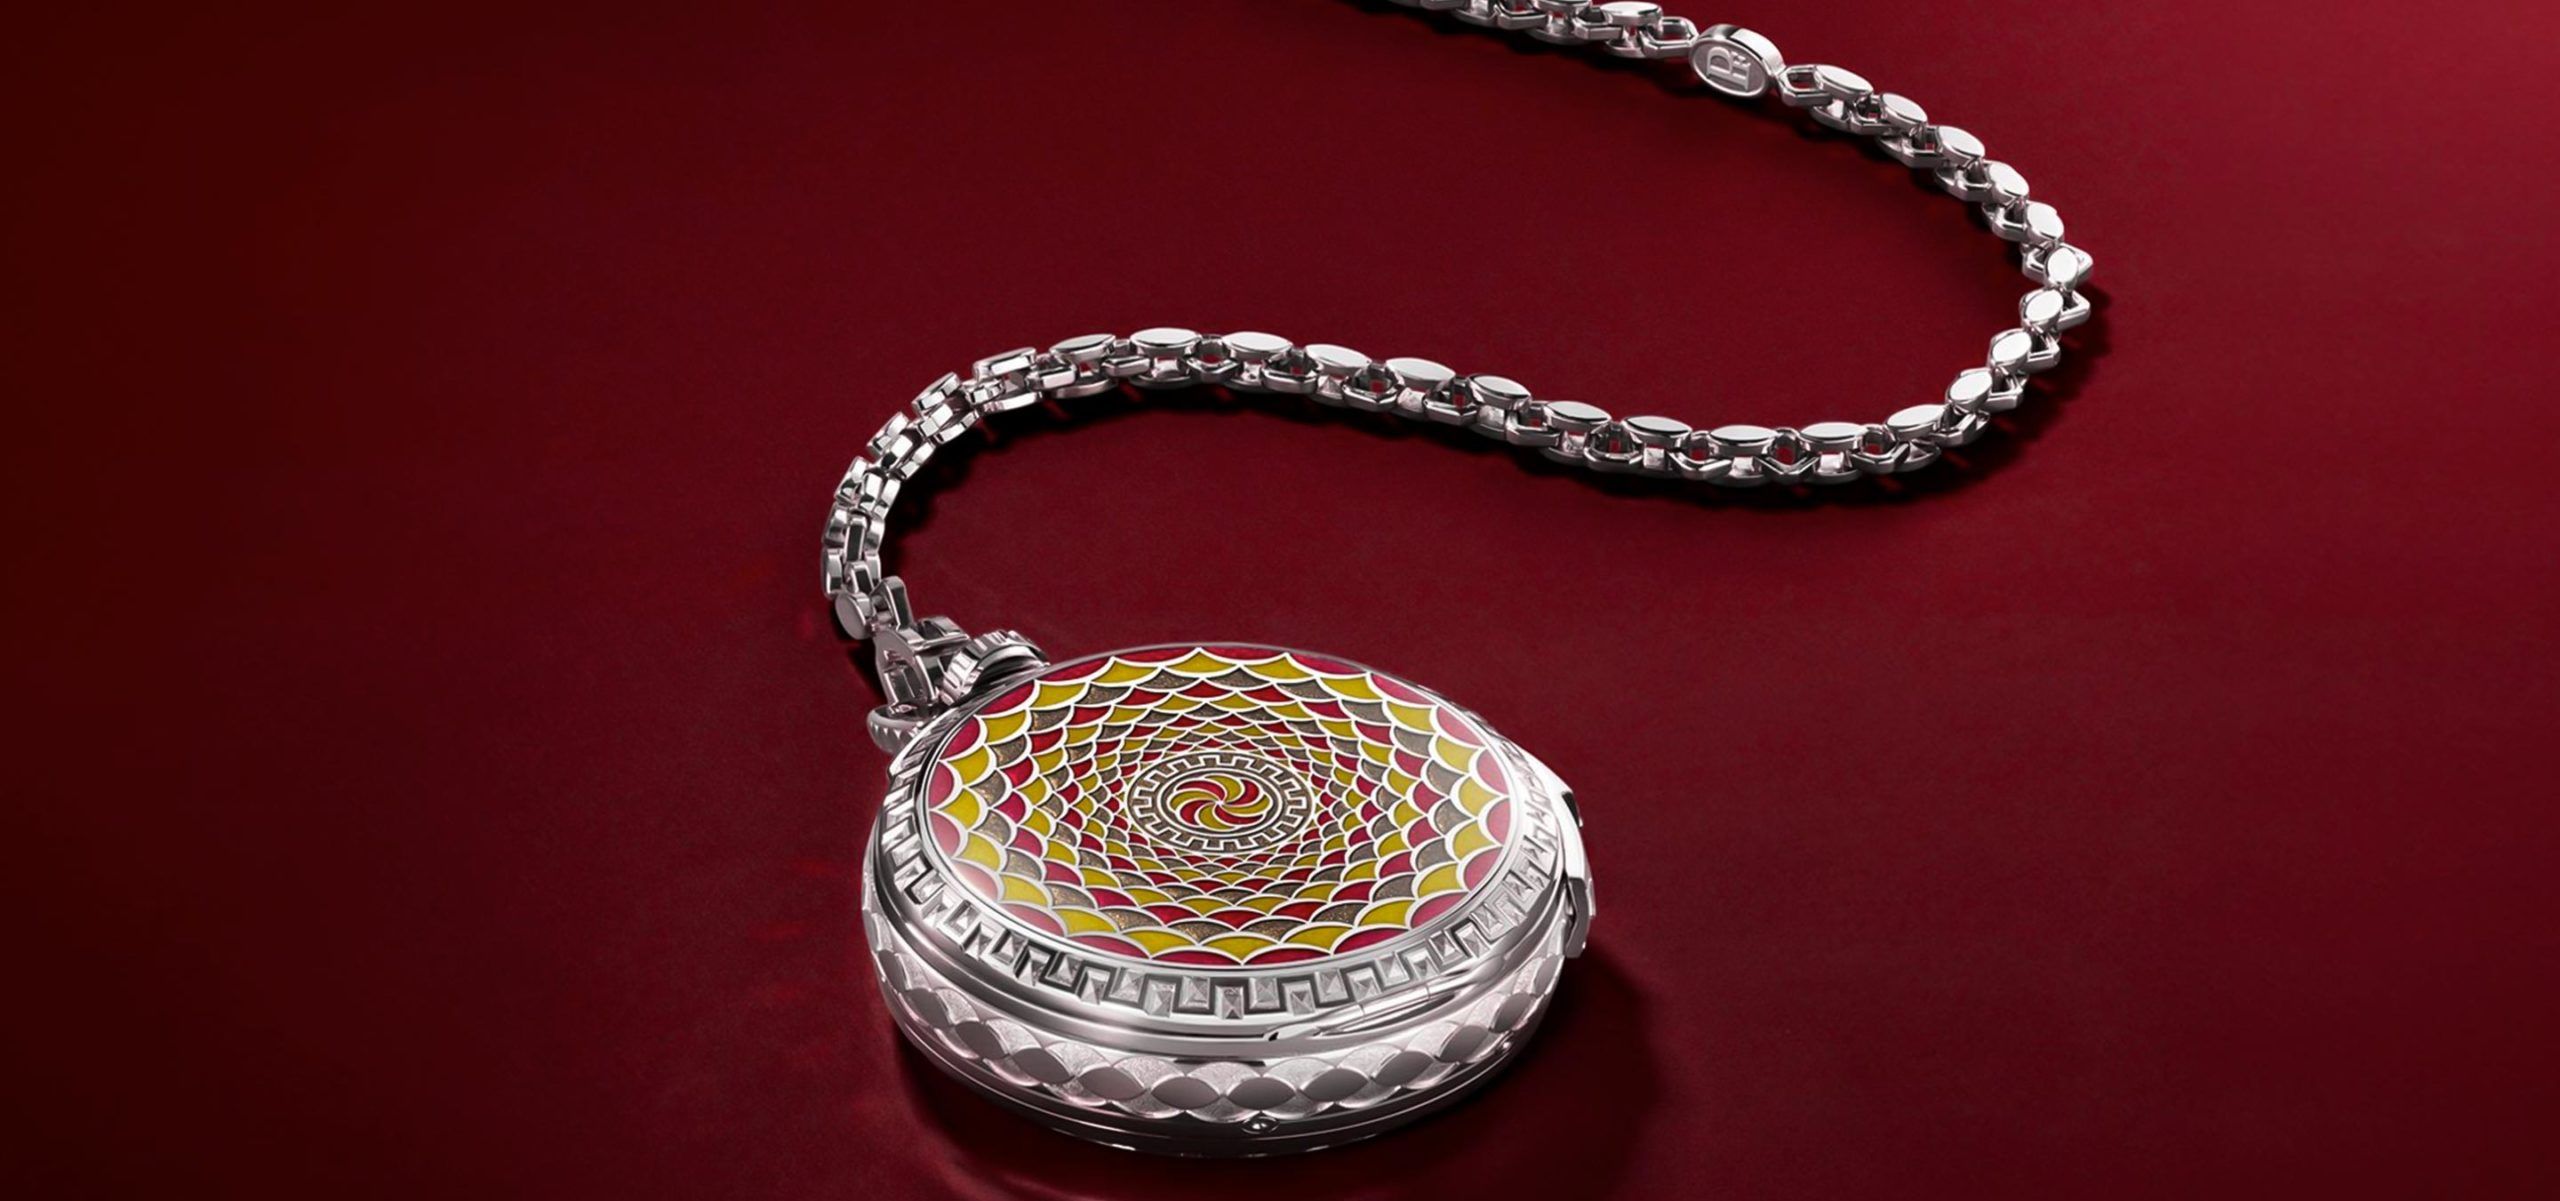 Old-World Charm: Presenting The Exquisite Parmigiani L’Armoriale Pocket Watch